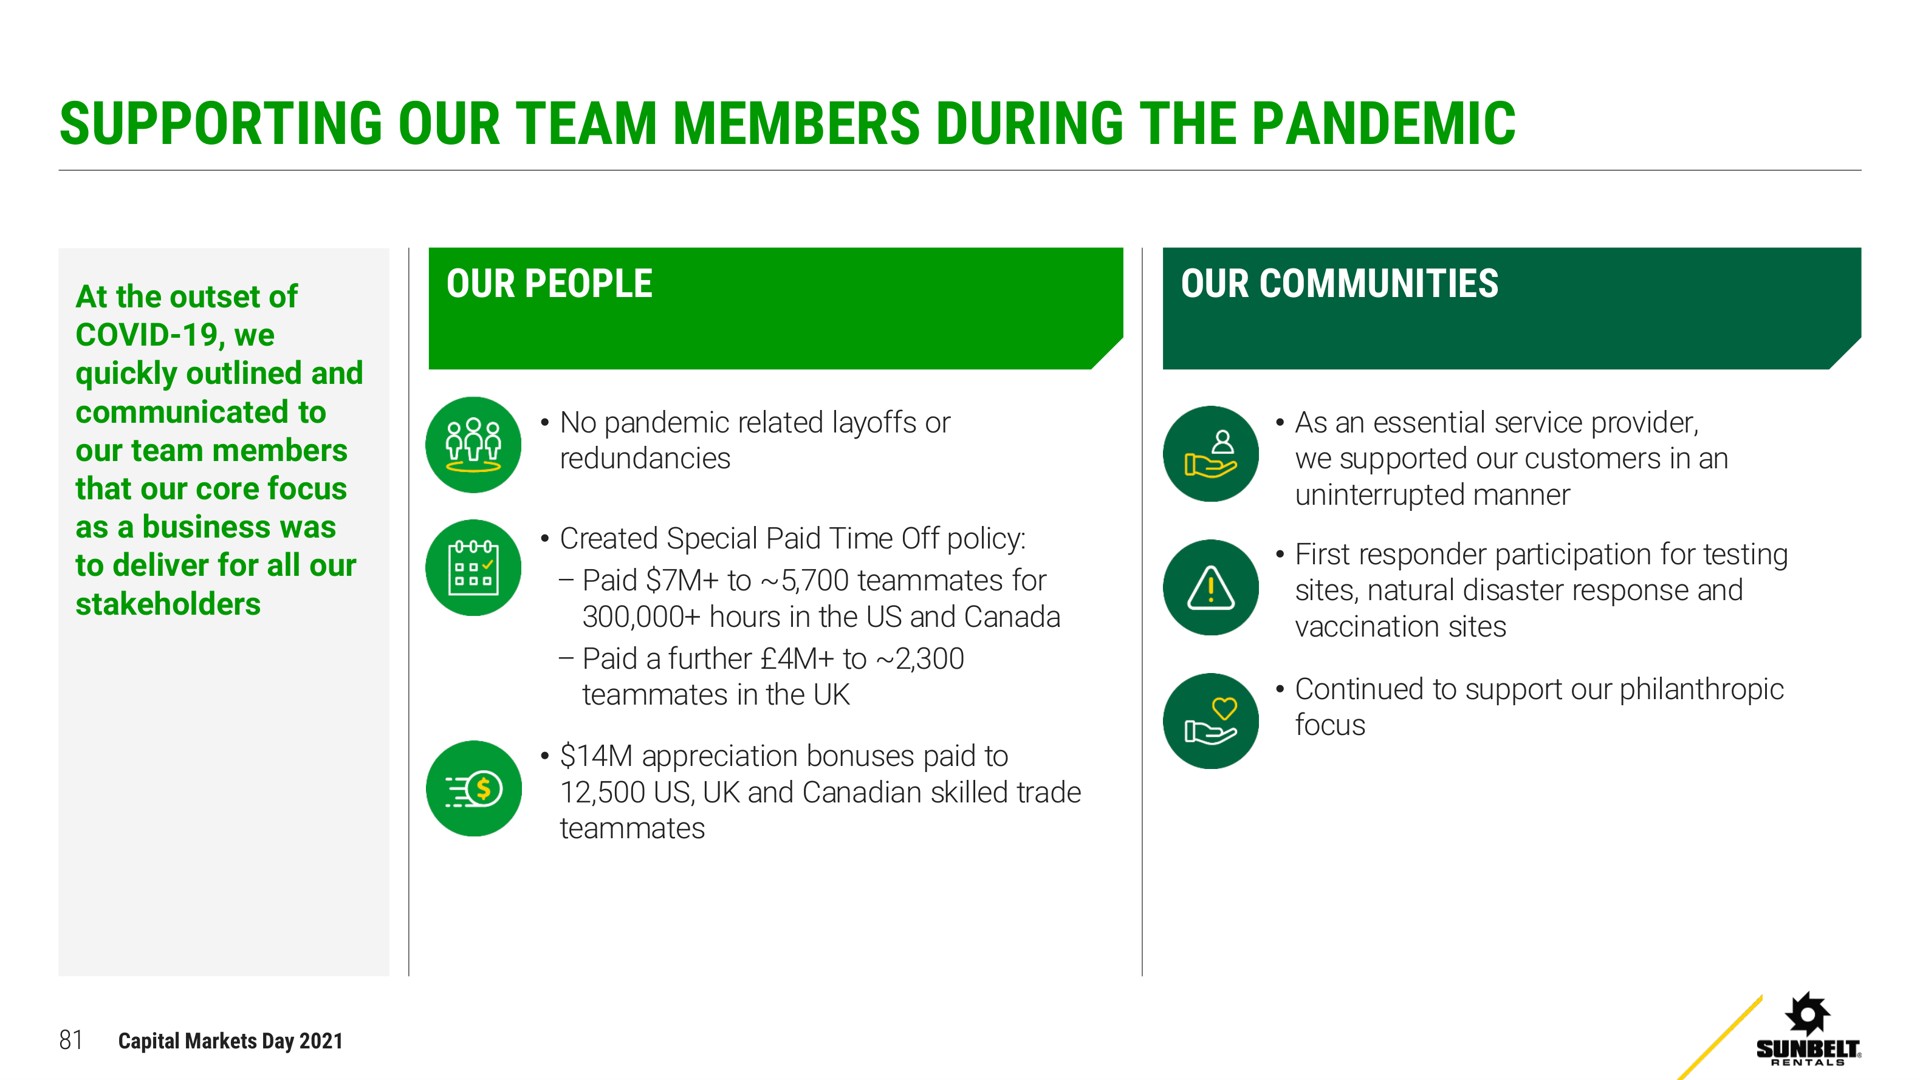 supporting our team members during the pandemic | Ashtead Group